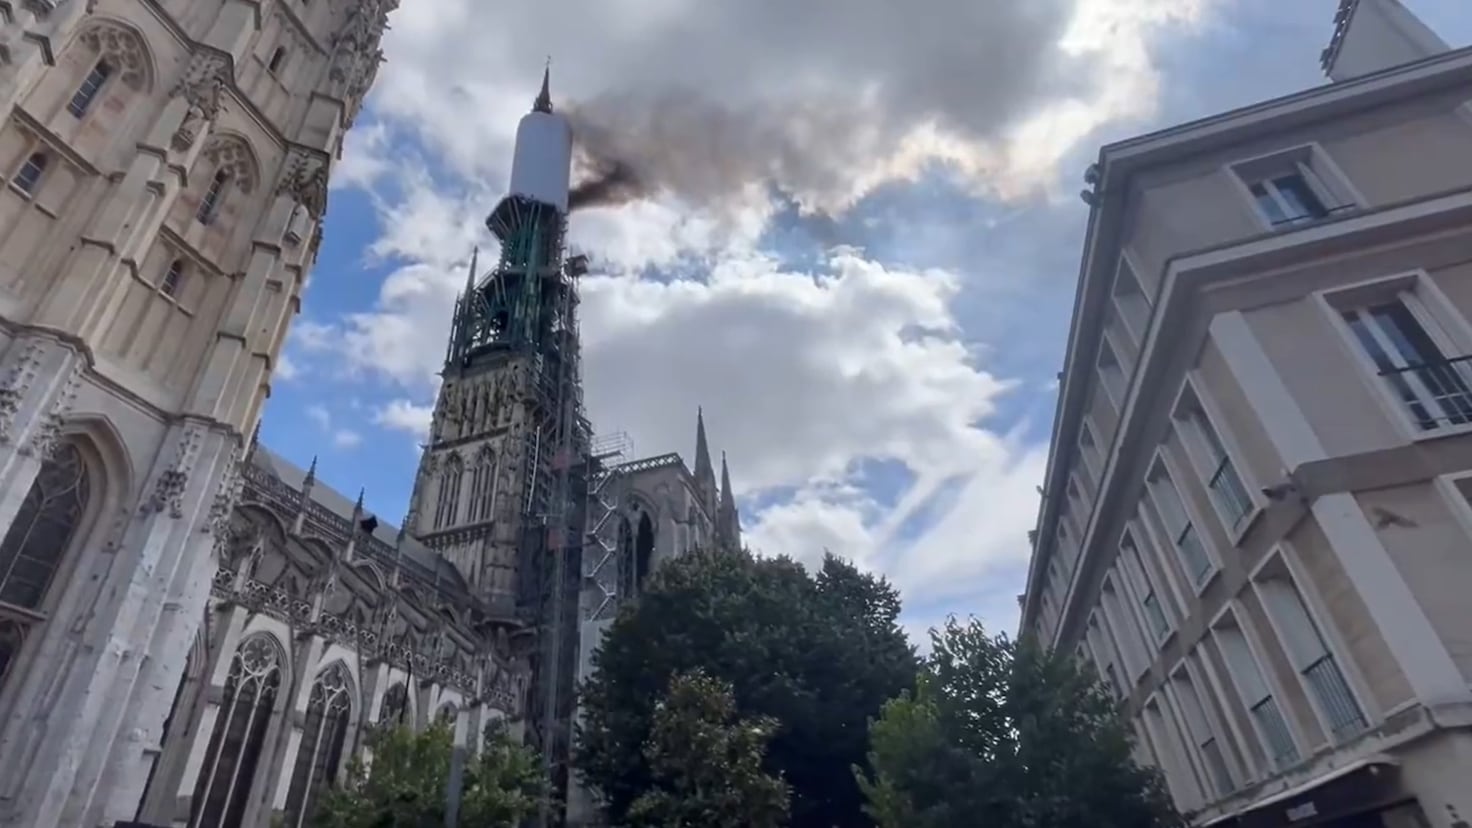 Fire in France: Rouen Cathedral on fire